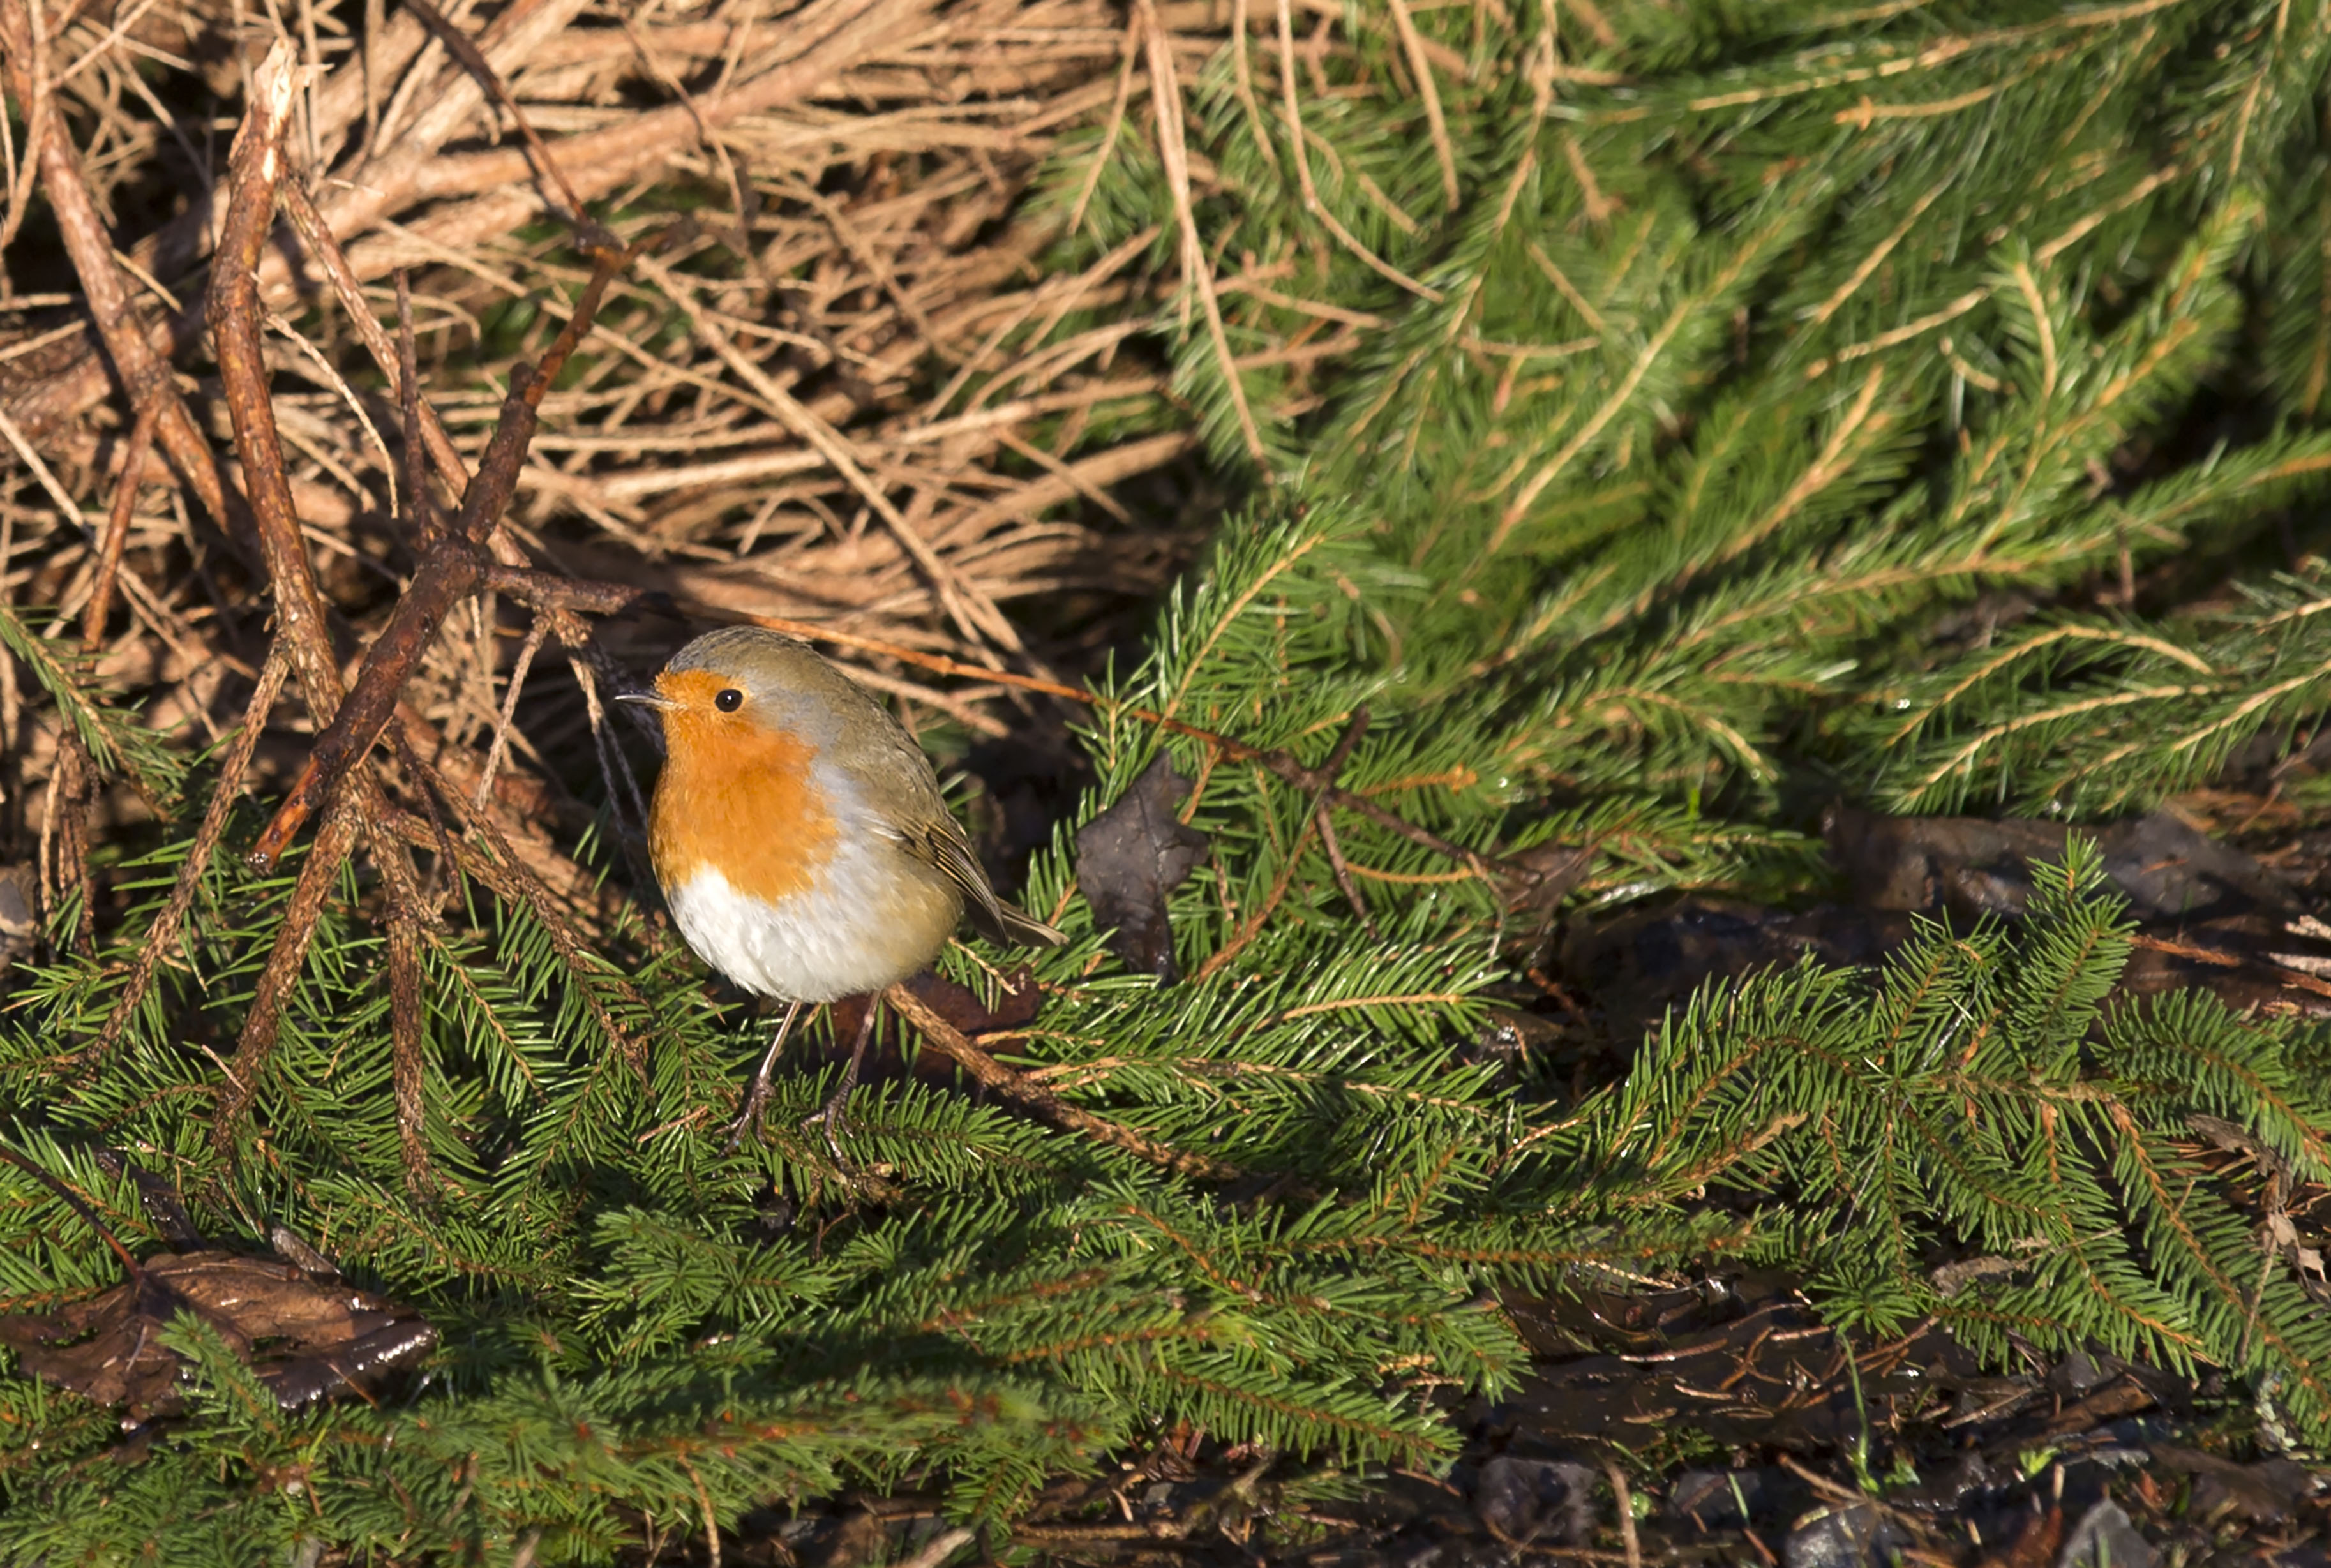 A robin sits on a conifer branch laid down on a woodchip floor. There are deadwood branches in the background.